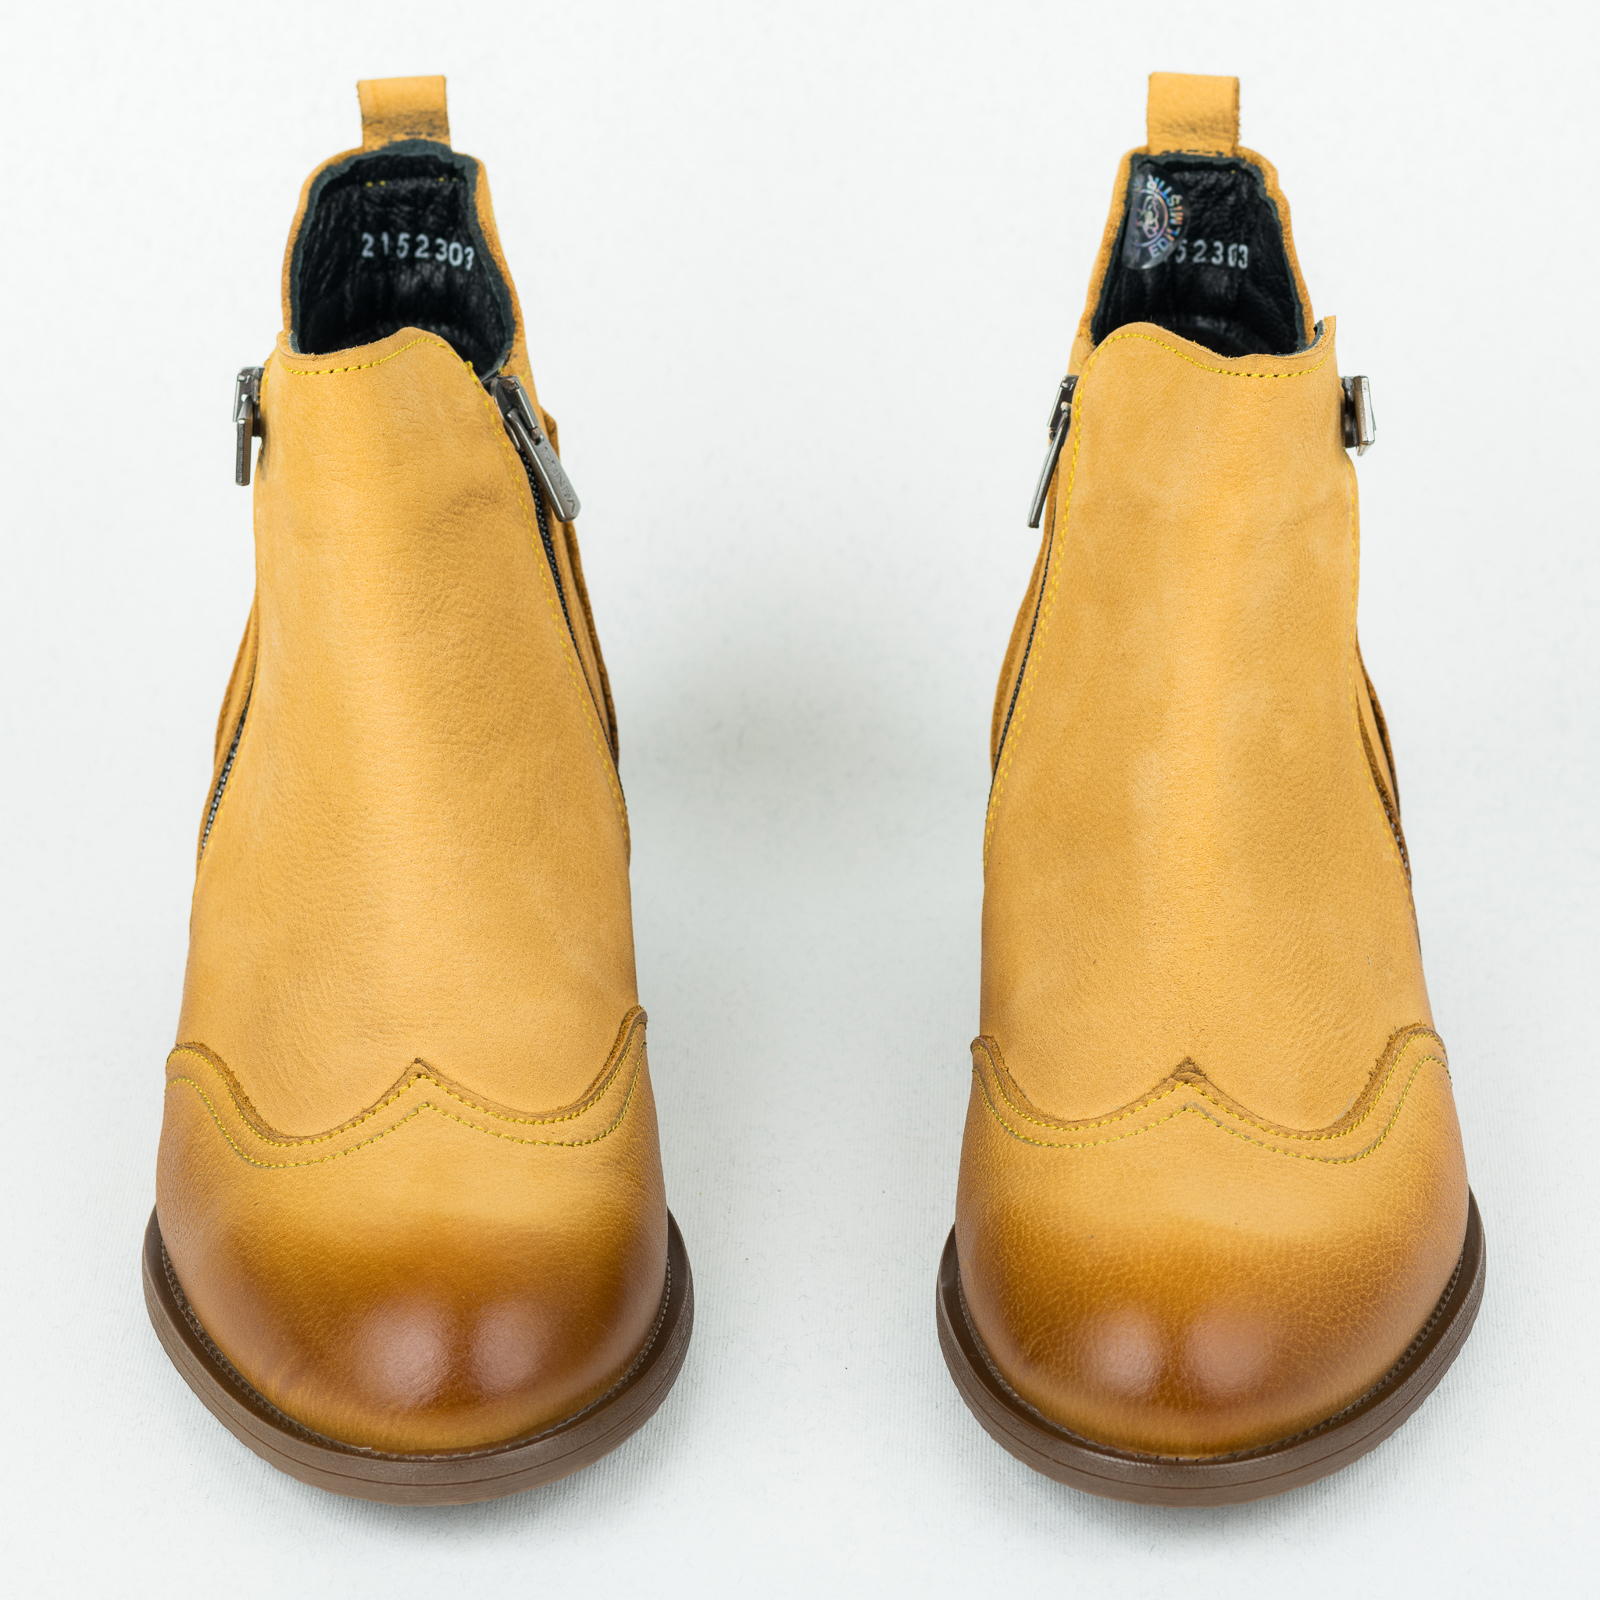 Leather ankle boots B442 - YELLOW